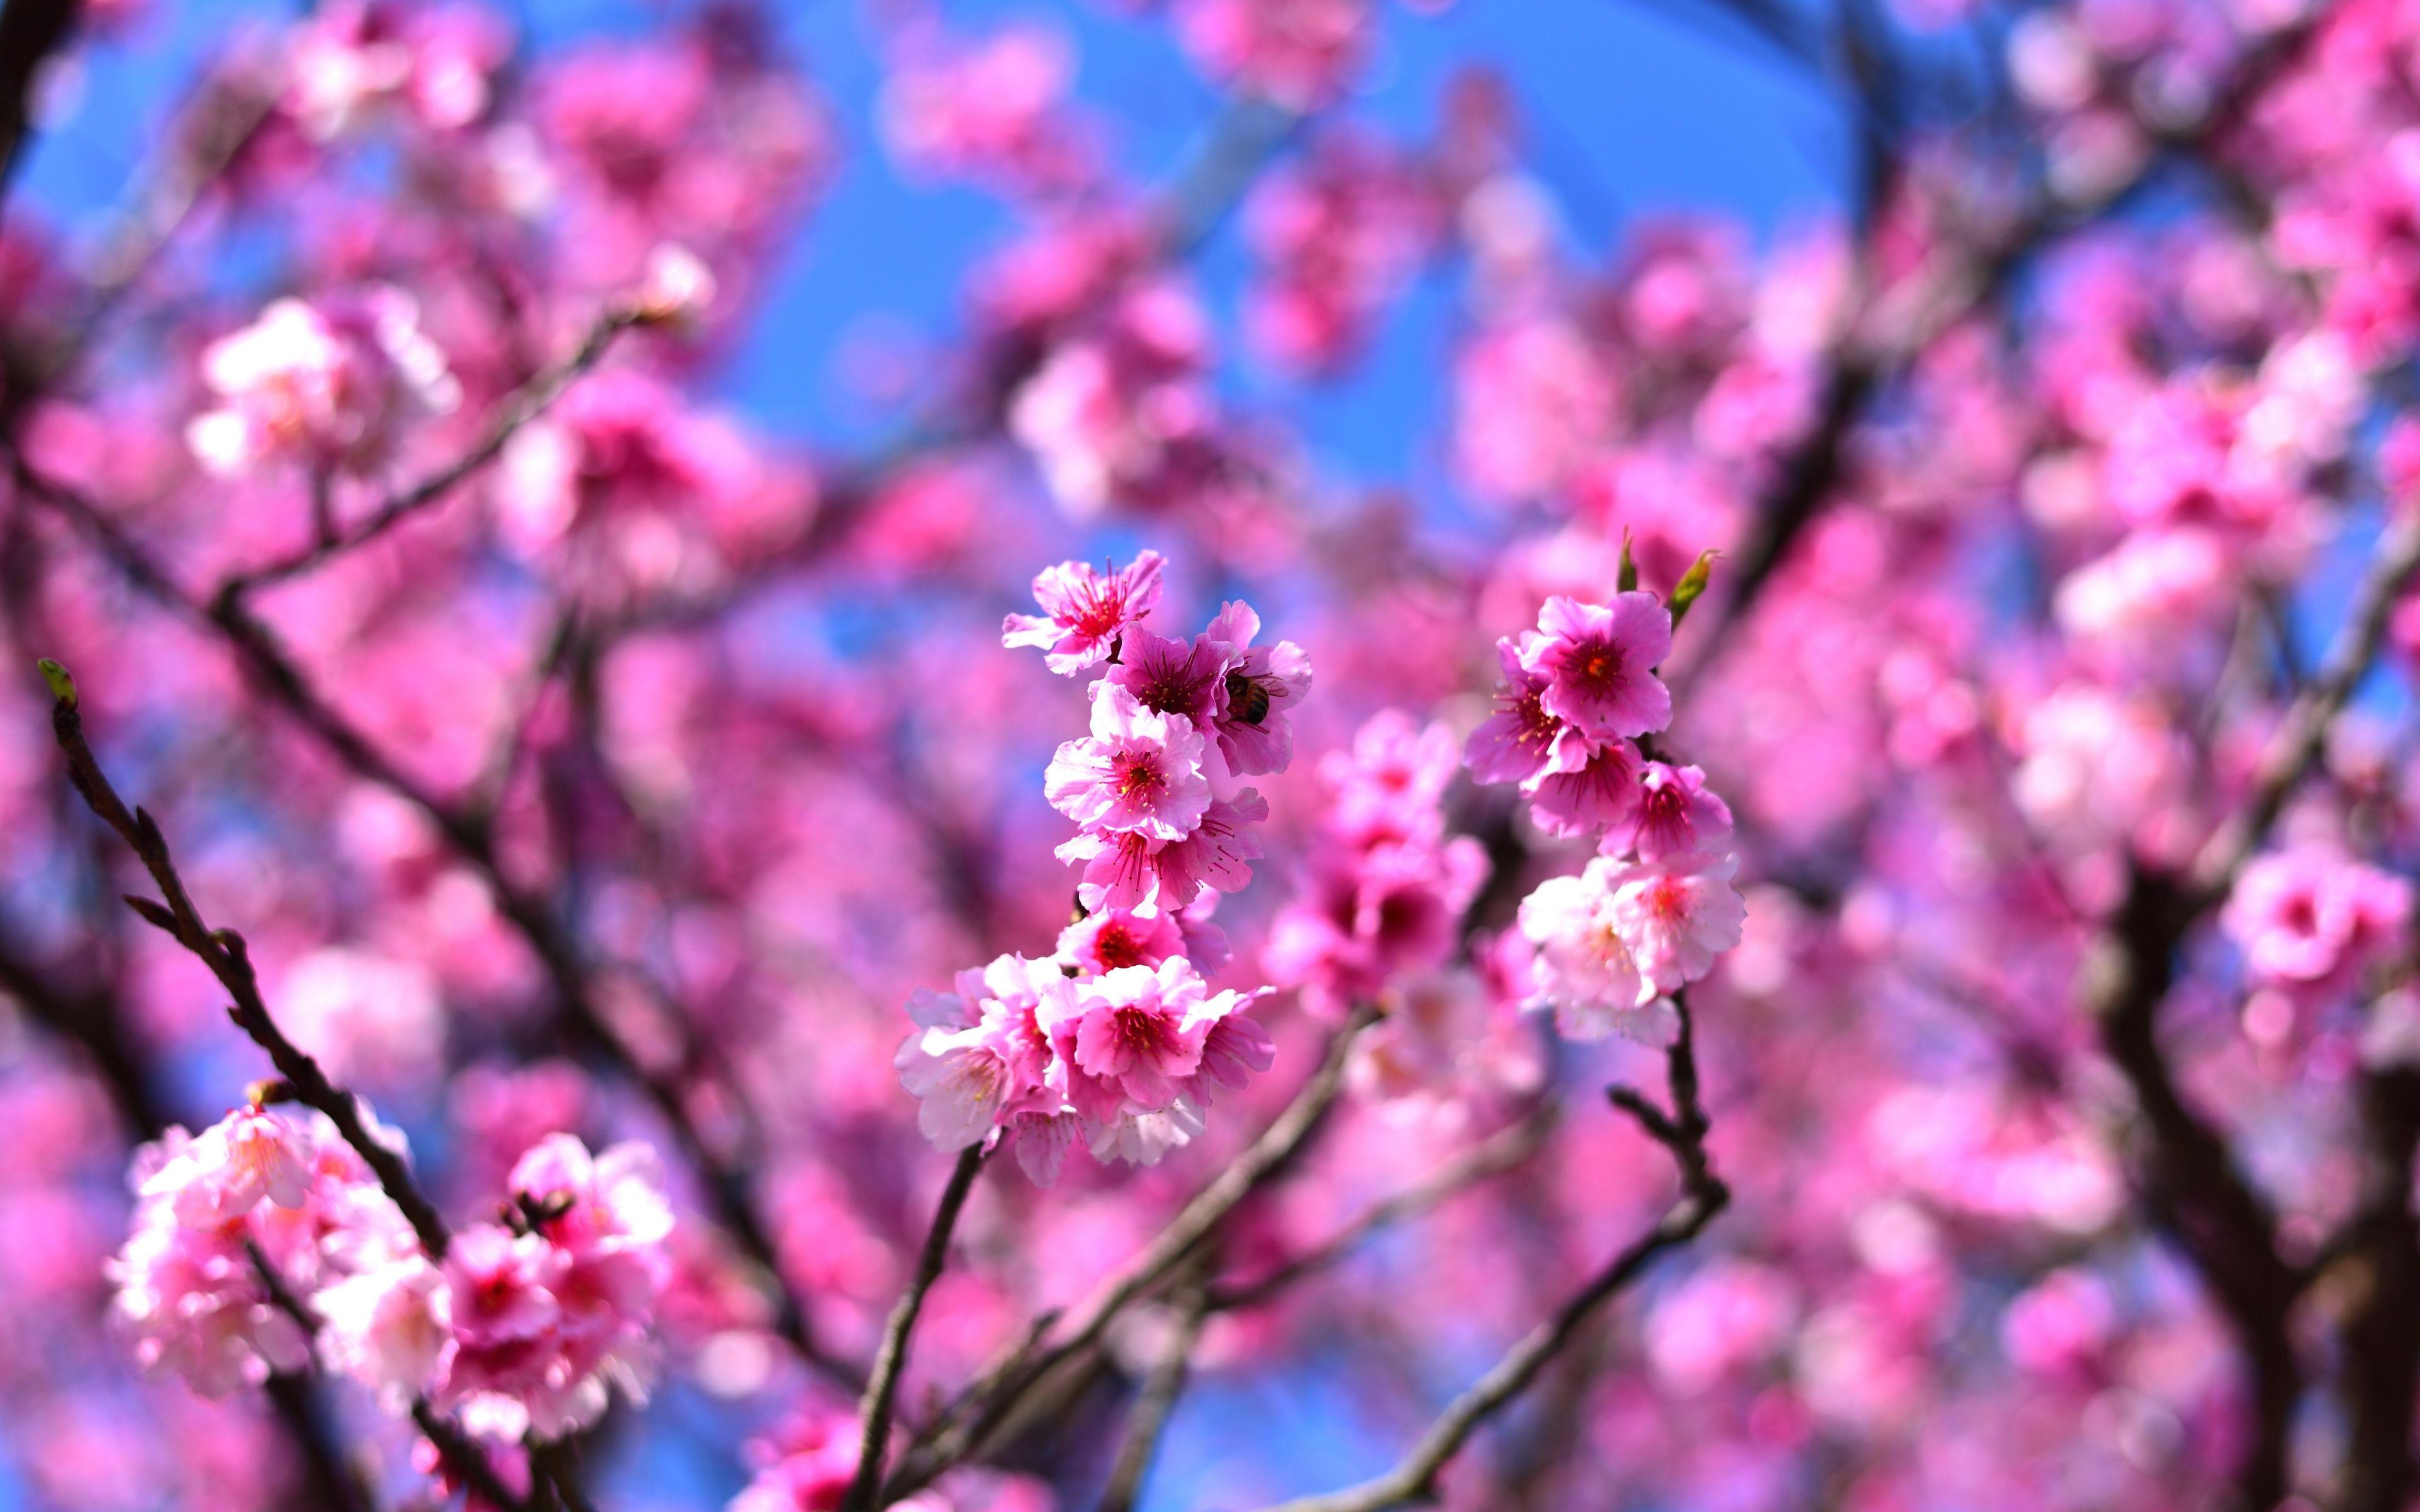 Cherry Blossom 4k Wallpaper 4k Cherry Blossom Wallpapers Top Free Images